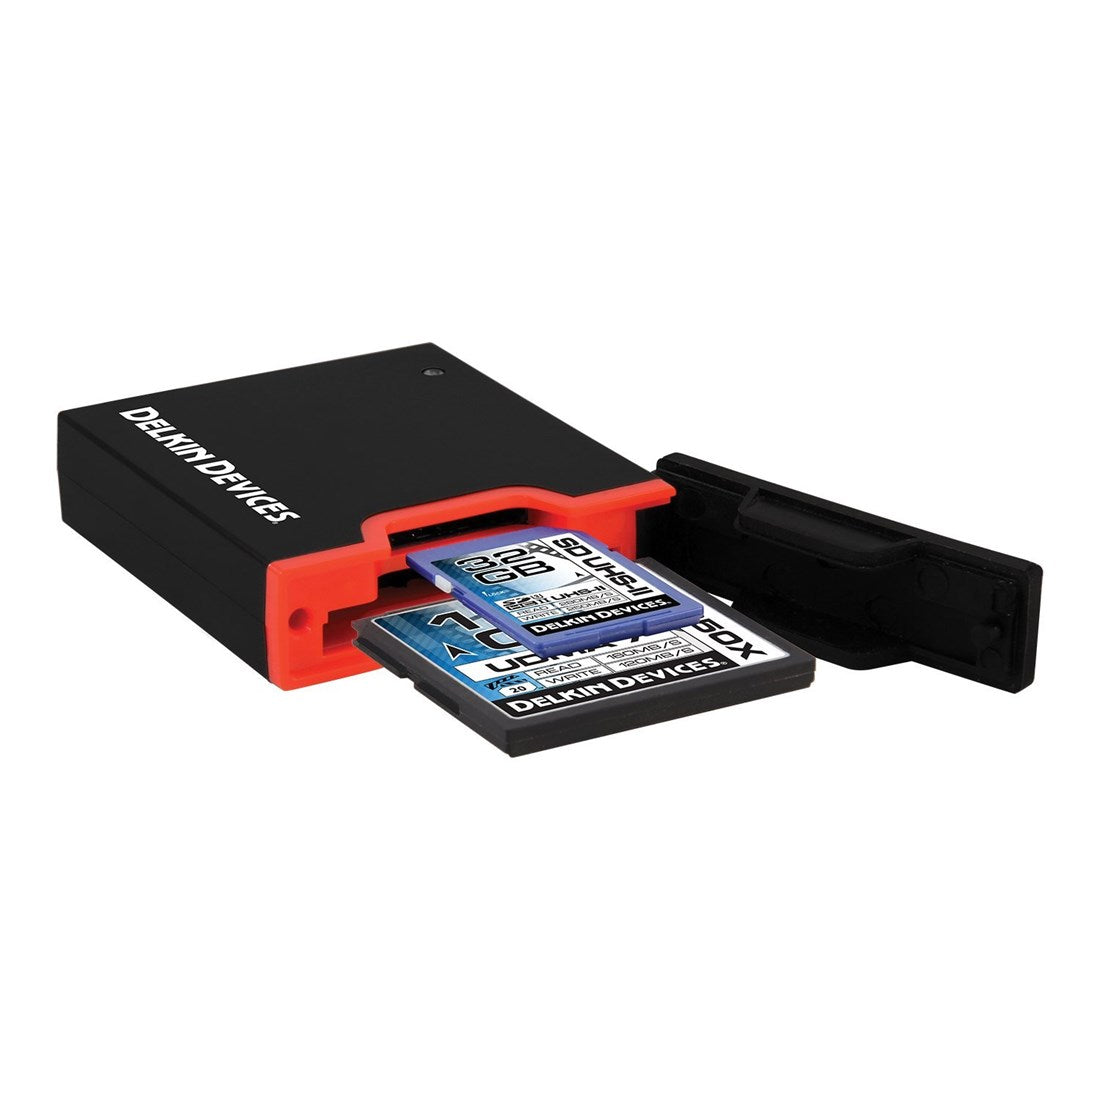 Product Image of Delkin USB 3.0 Dual Slot SD UHS-II and CF Memory Card Reader - Black